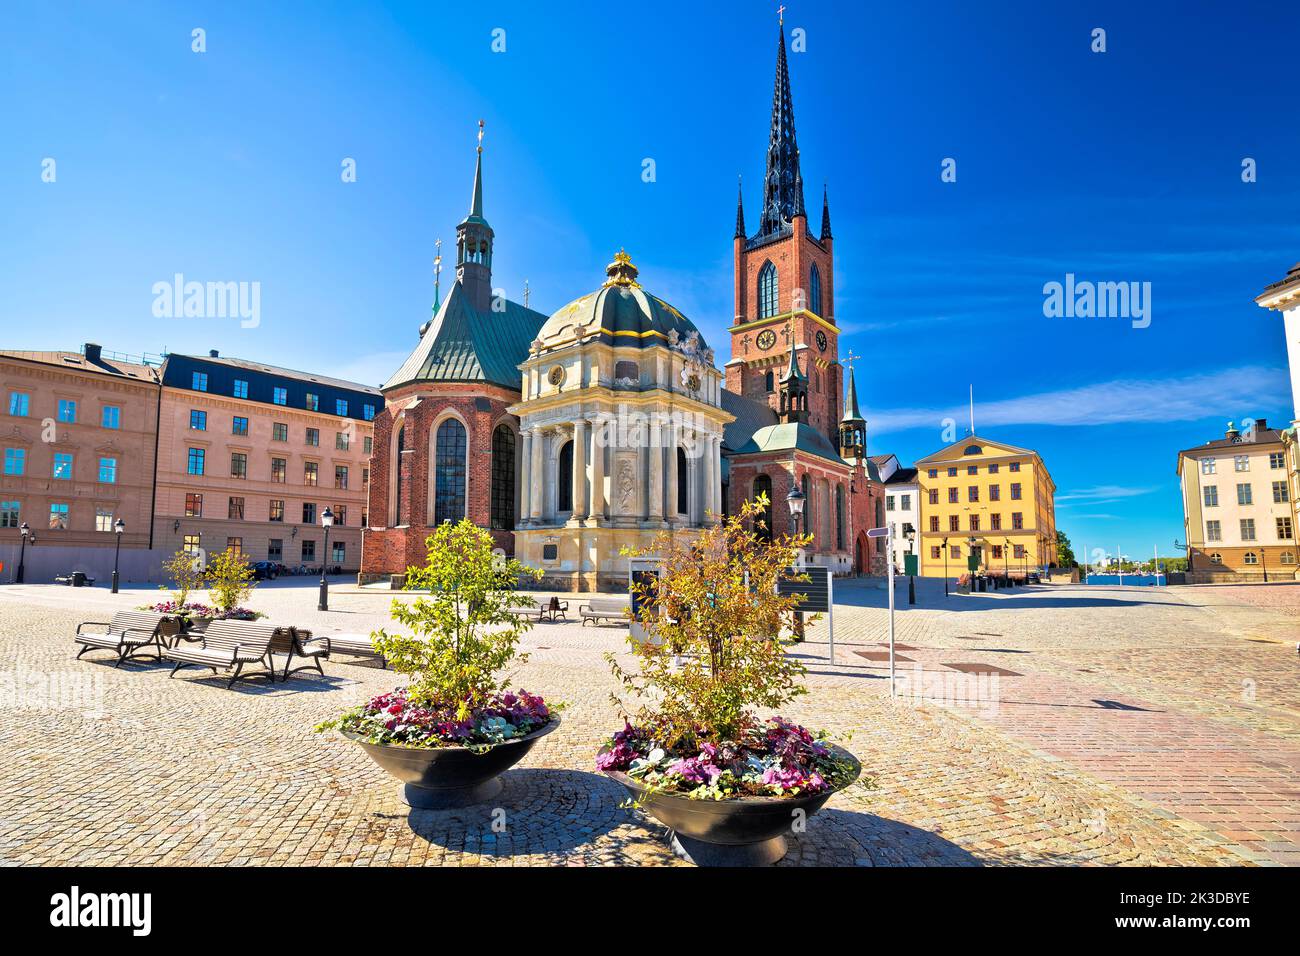 Riddarholmen Church and scenic square in Stockholm street view, capital of Sweden Stock Photo